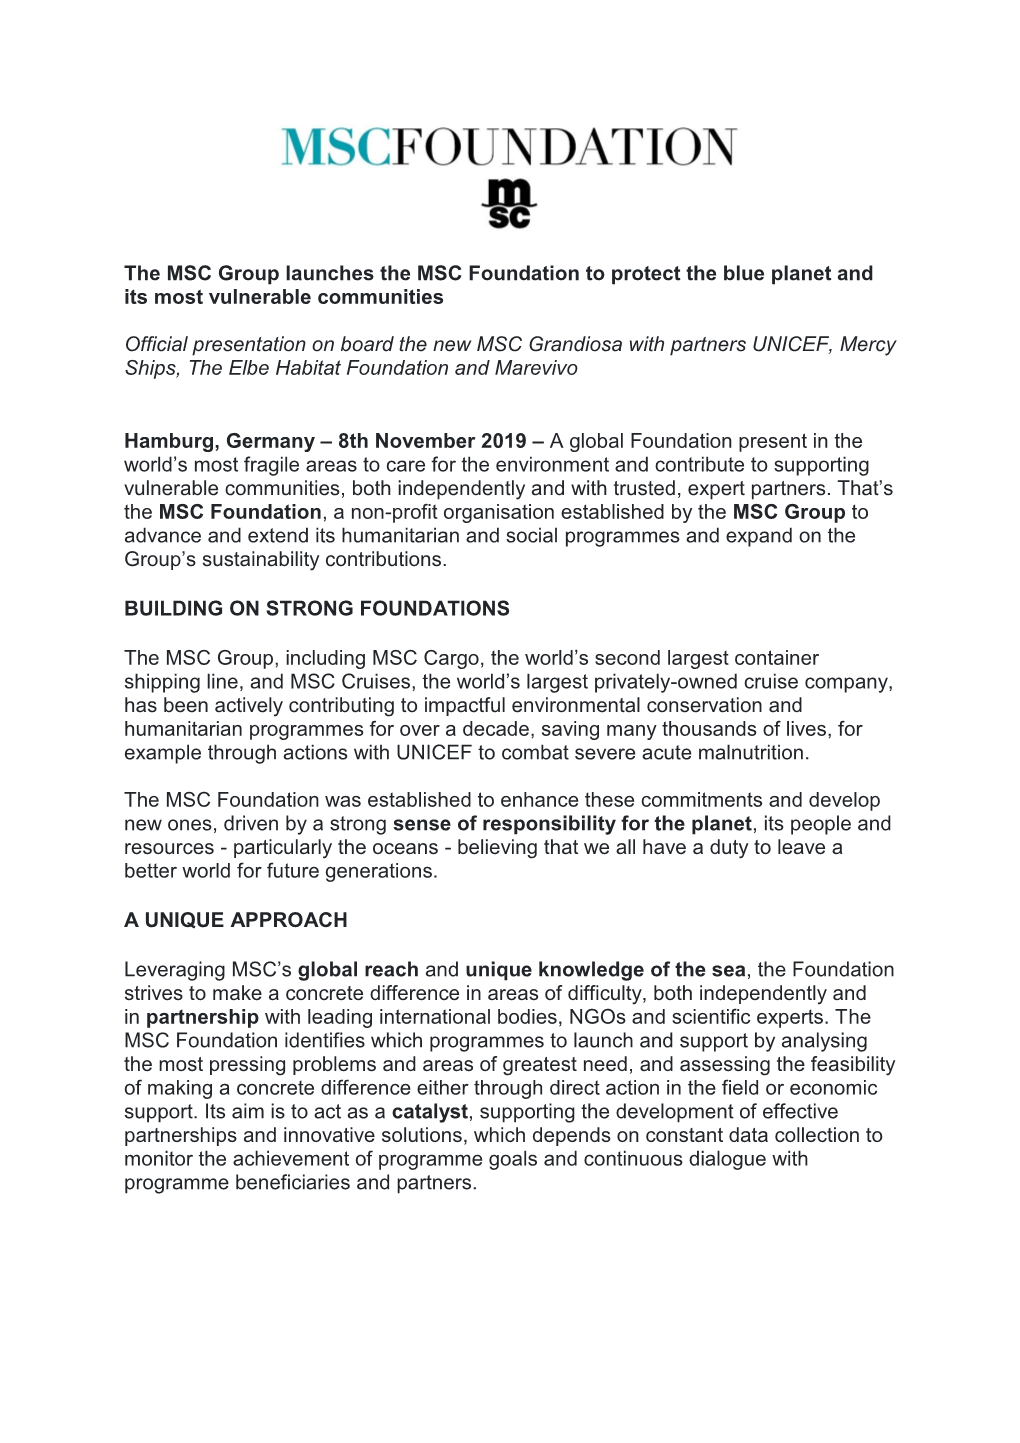 The MSC Group Launches the MSC Foundation to Protect the Blue Planet and Its Most Vulnerable Communities